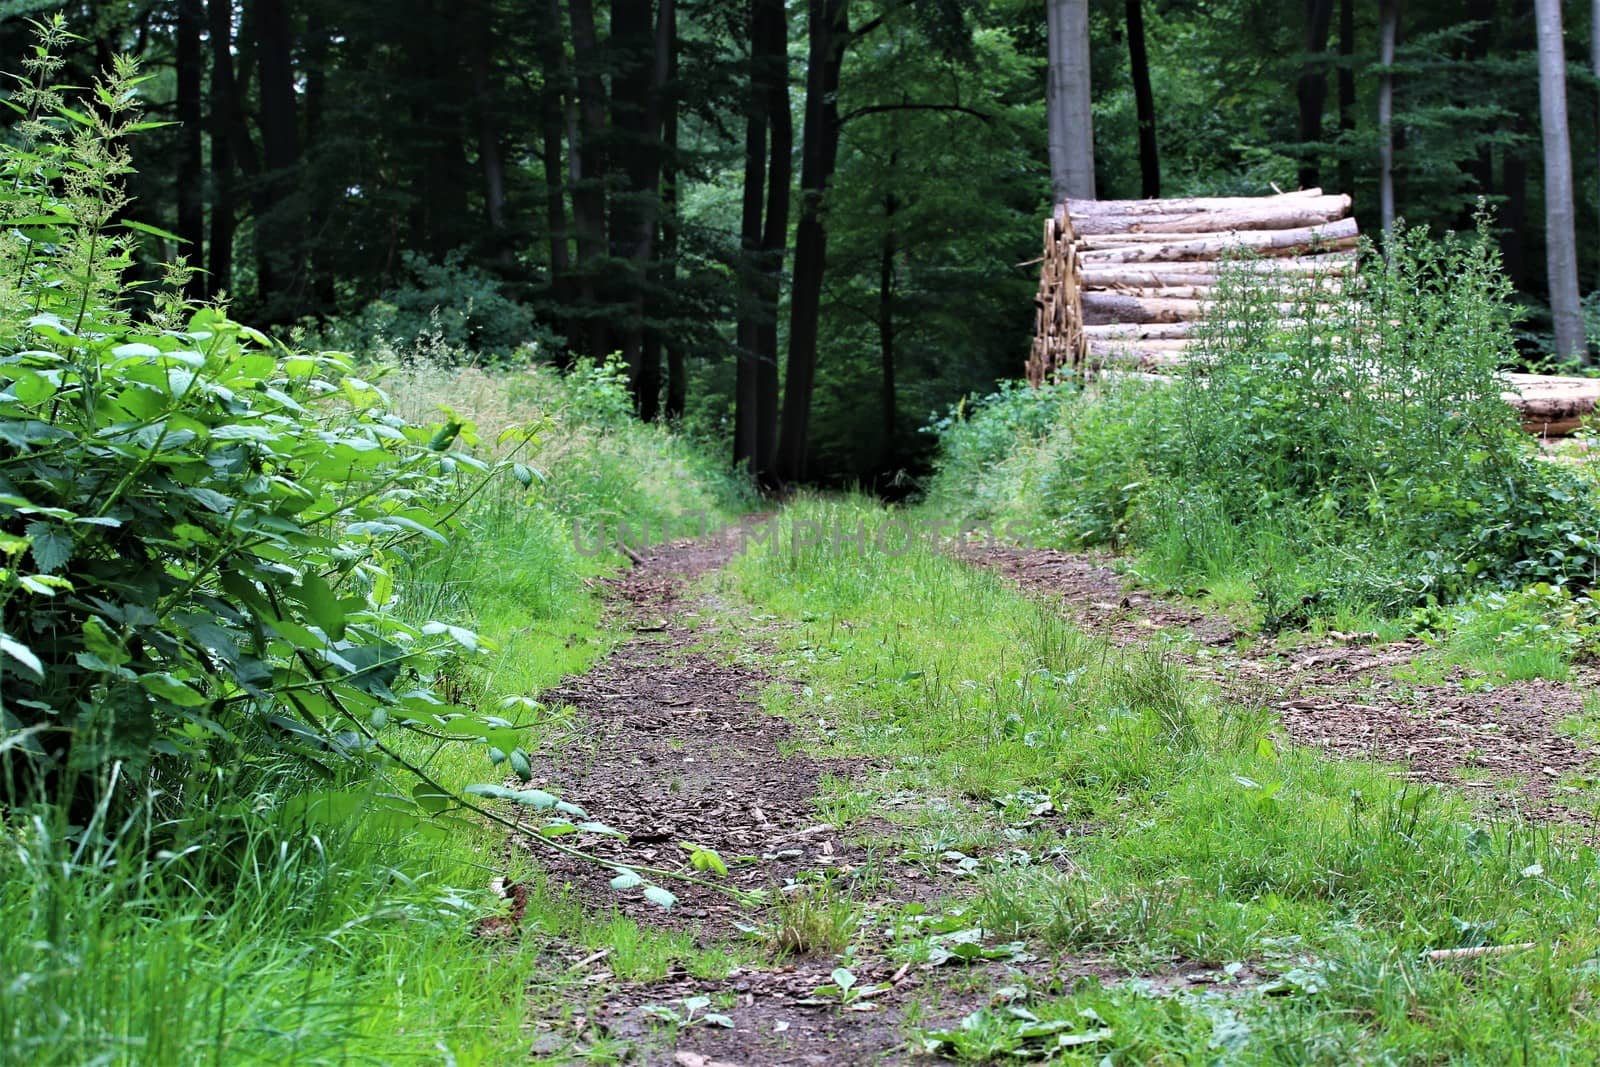 A natural path in the forest with grass on the median and a stack of wood at the side